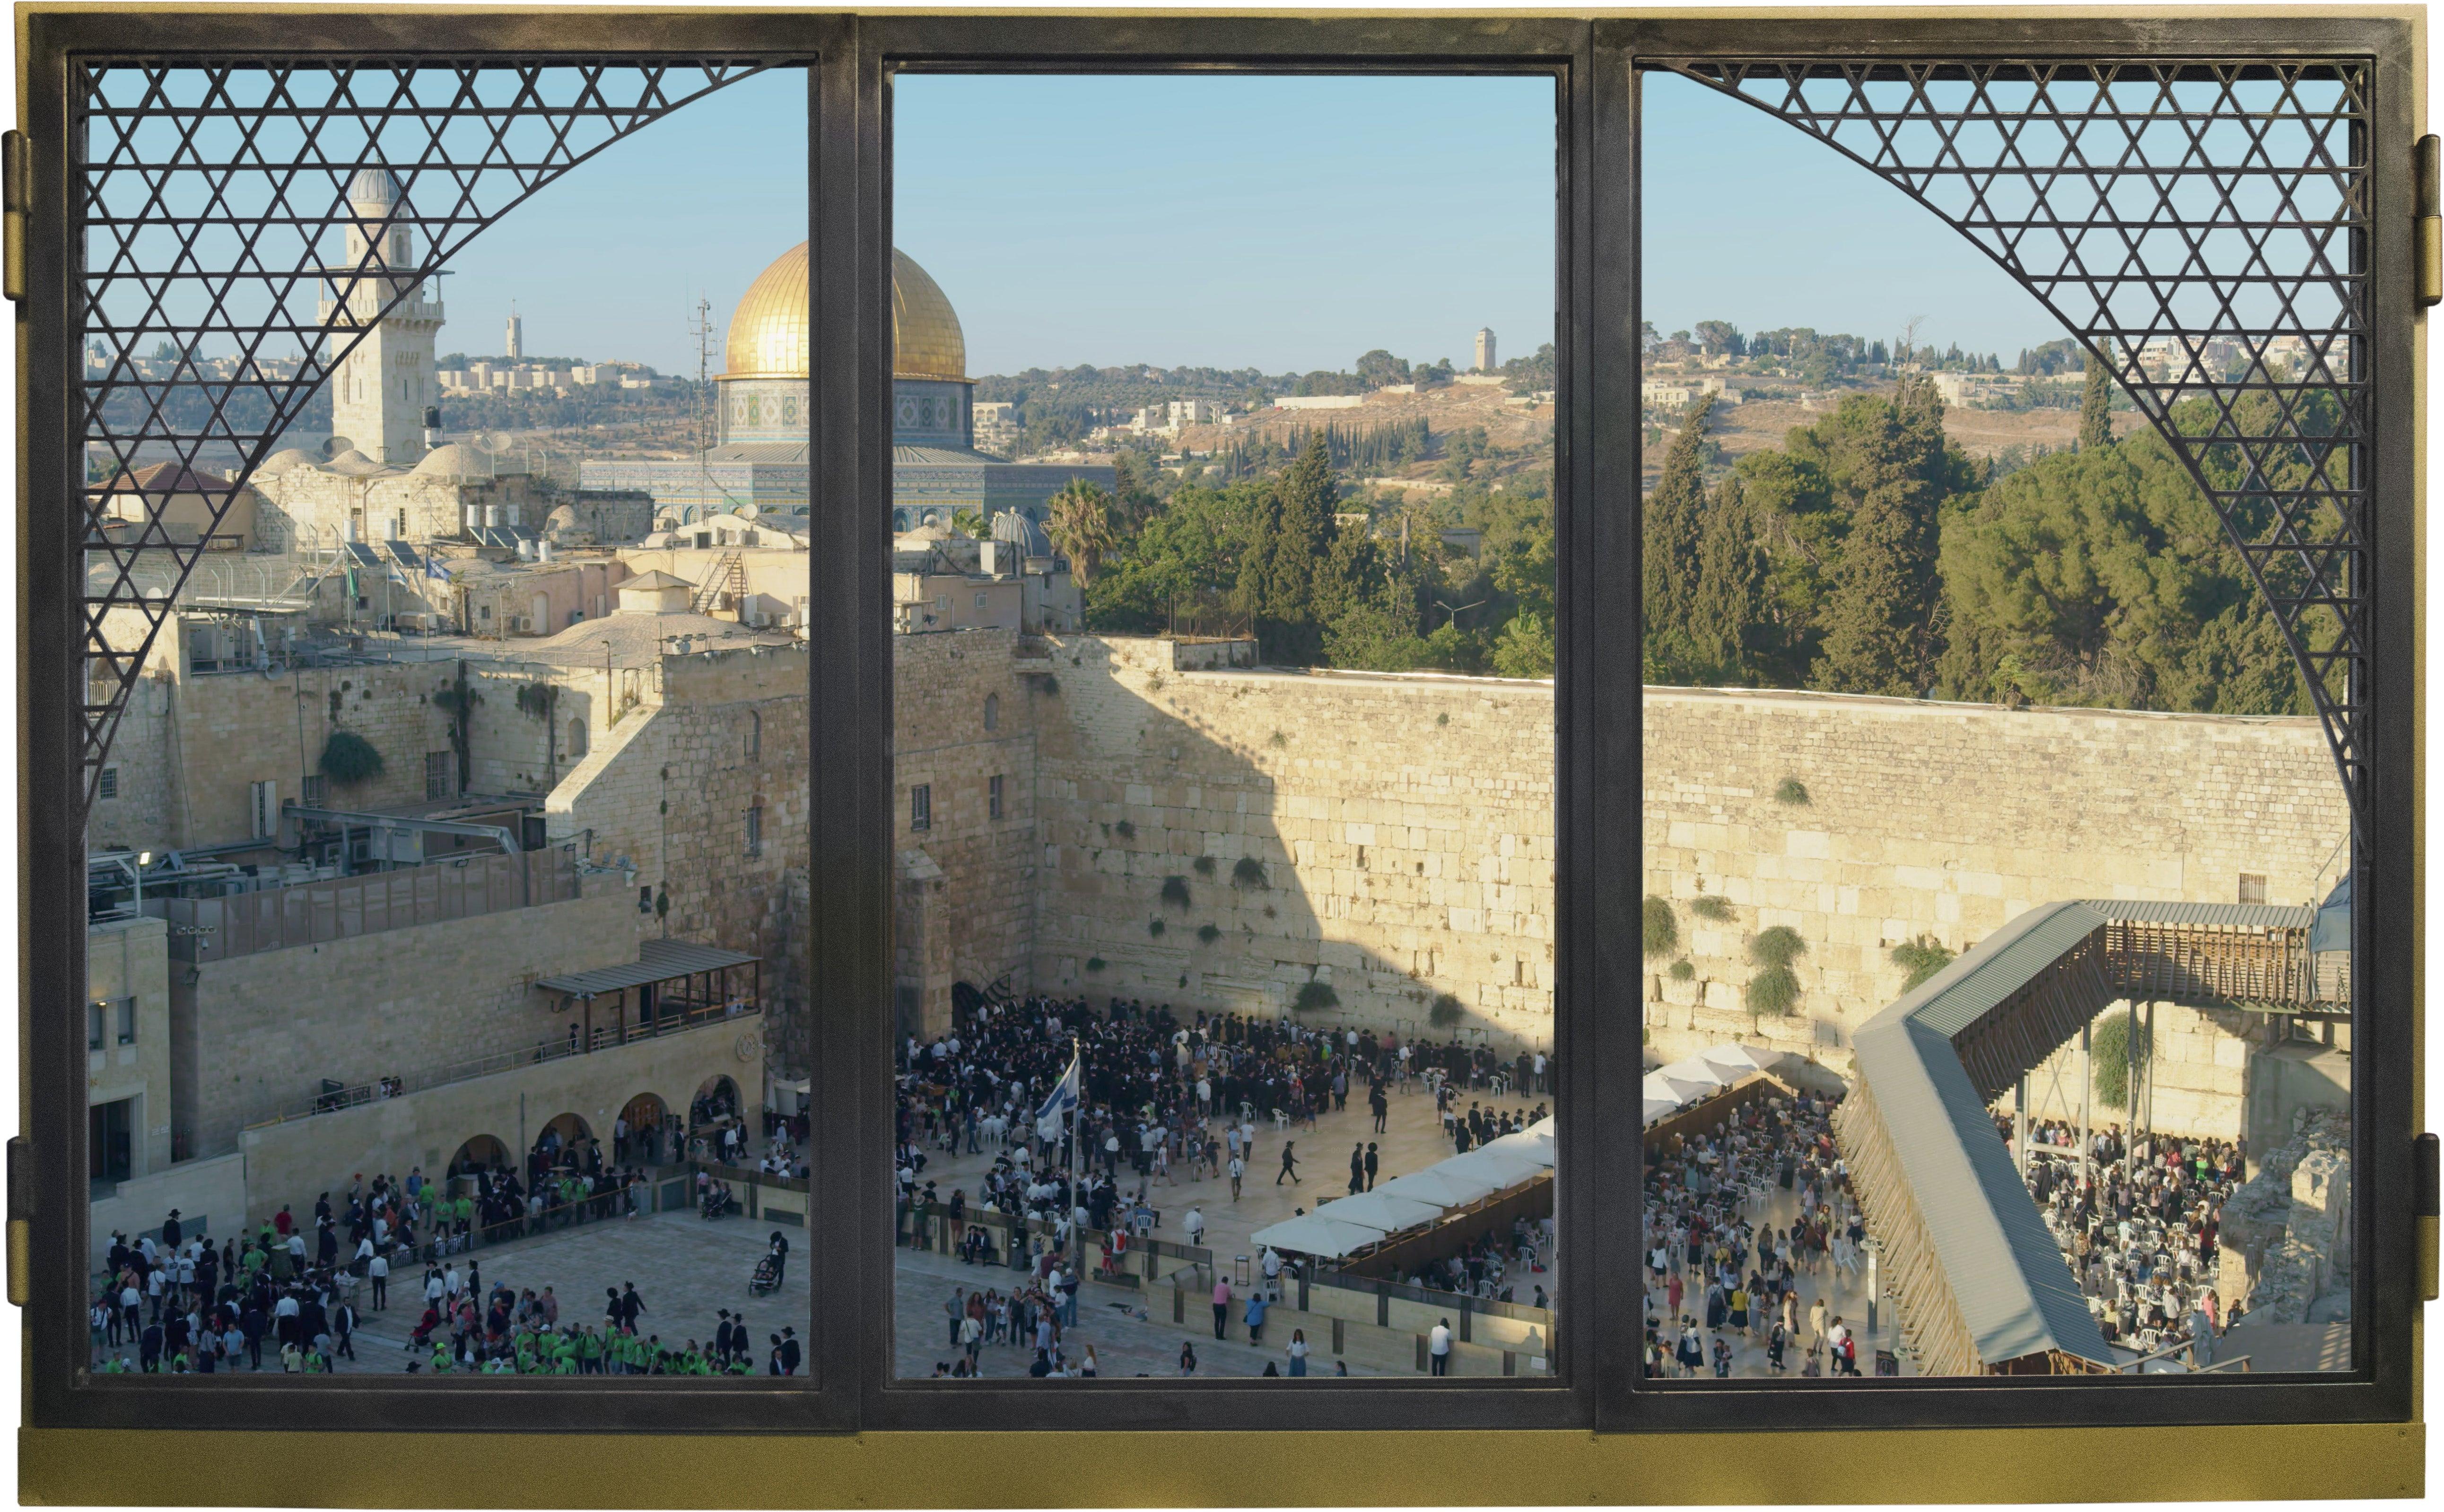 Contemporary Anotherview N.18 A Sunday by the Western Wall, Video Art by Anotherview For Sale